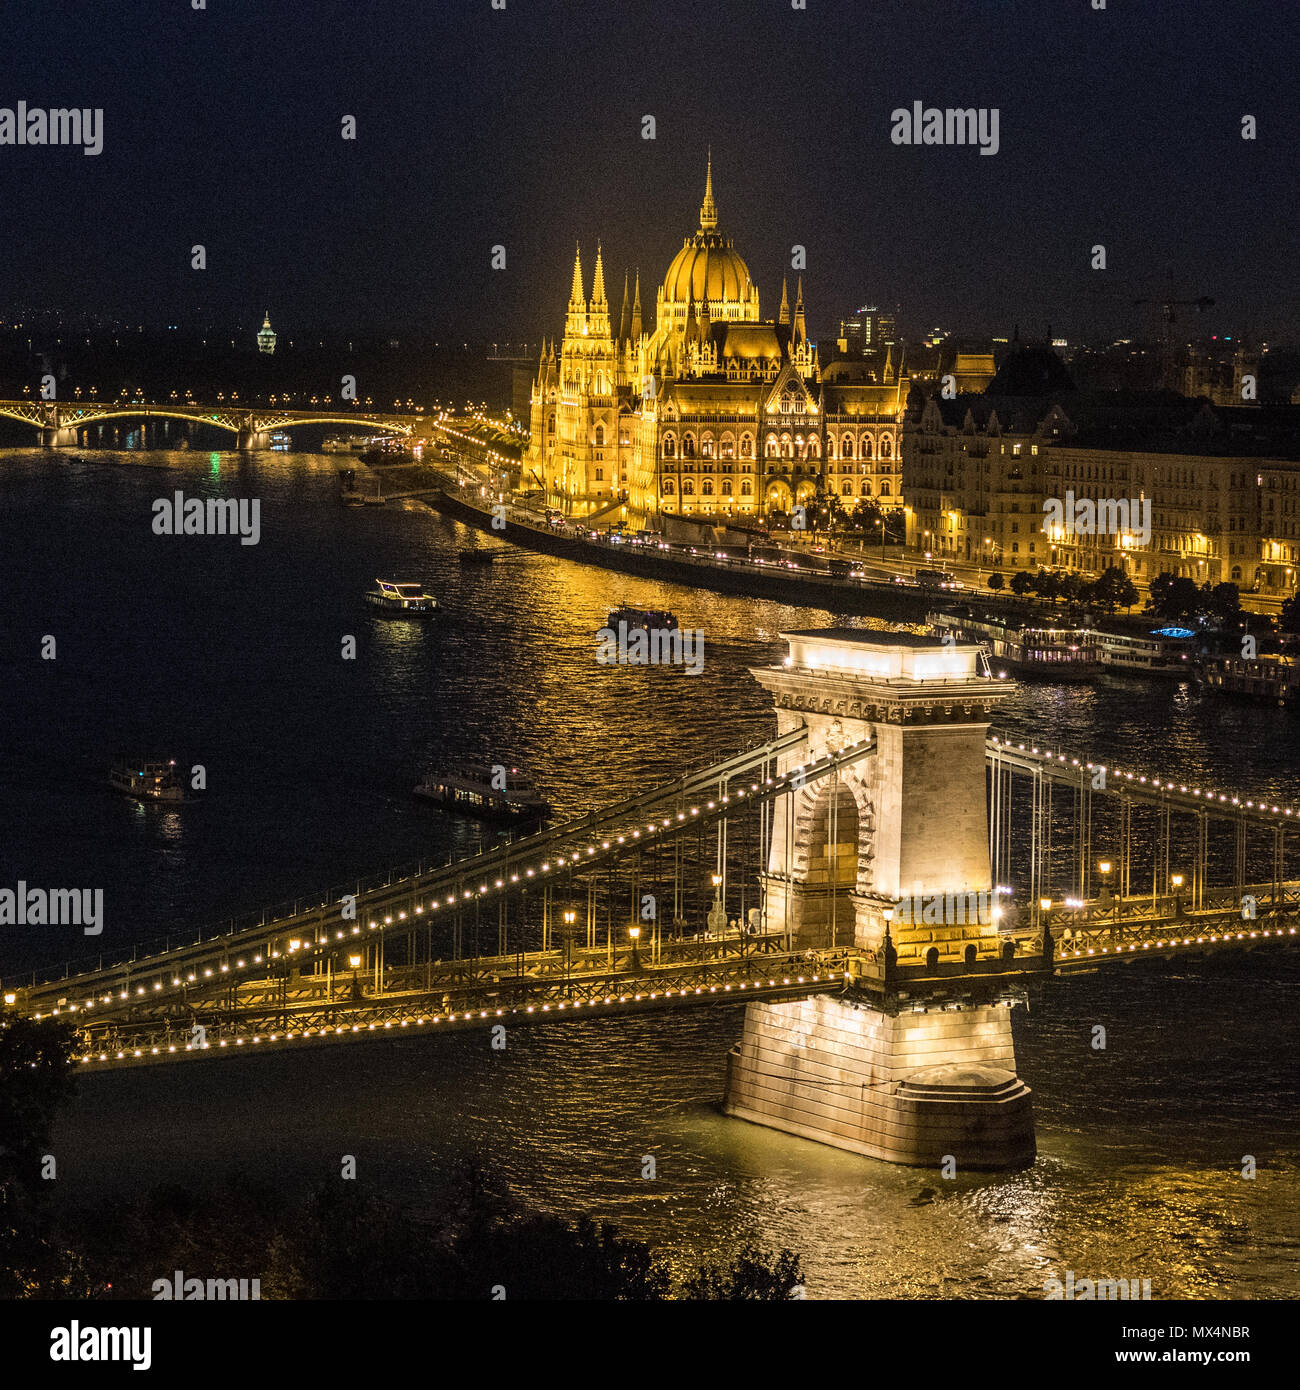 'Szechenyi Chain Bridge' Suspension Bridge spanning the River Danube with the Hungarian Parliament building behind, Budapest, Hungary. Stock Photo